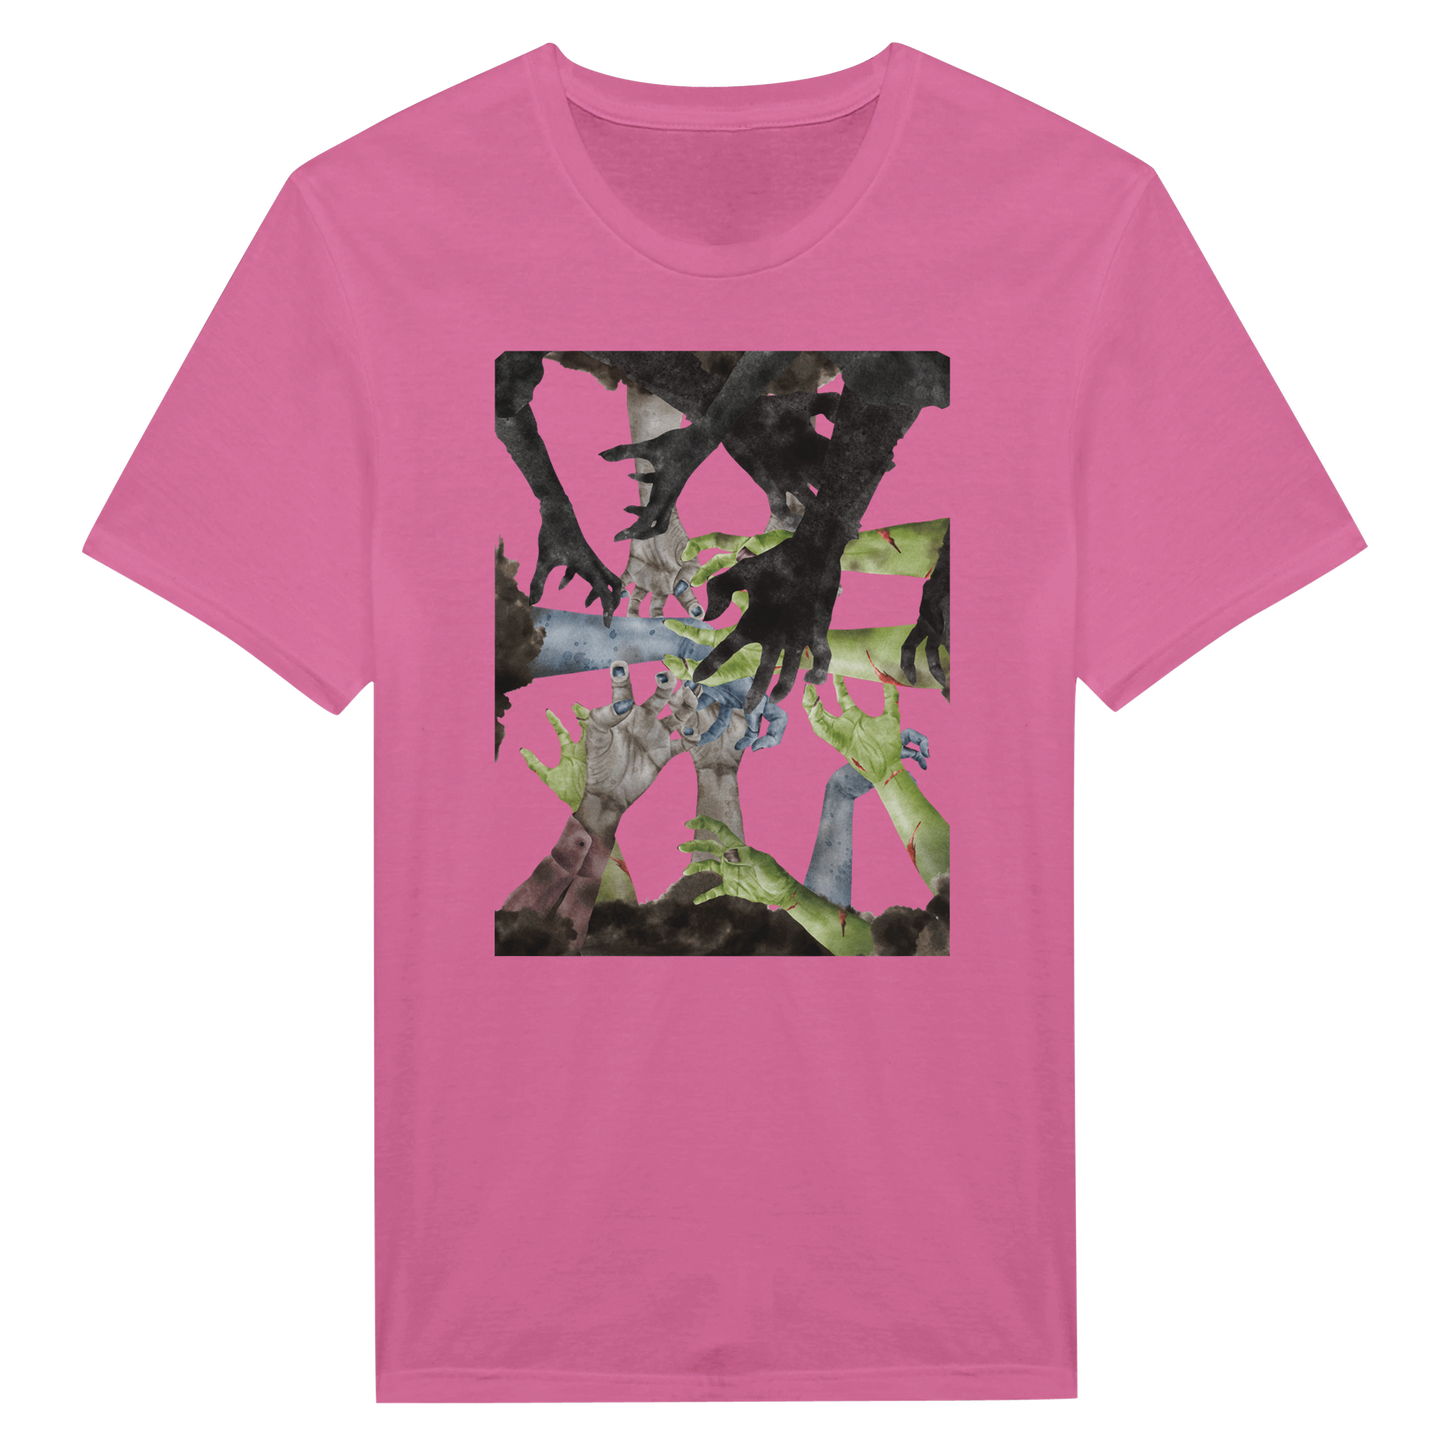 Pink Tee Shirt with zombie hands reaching in the center.